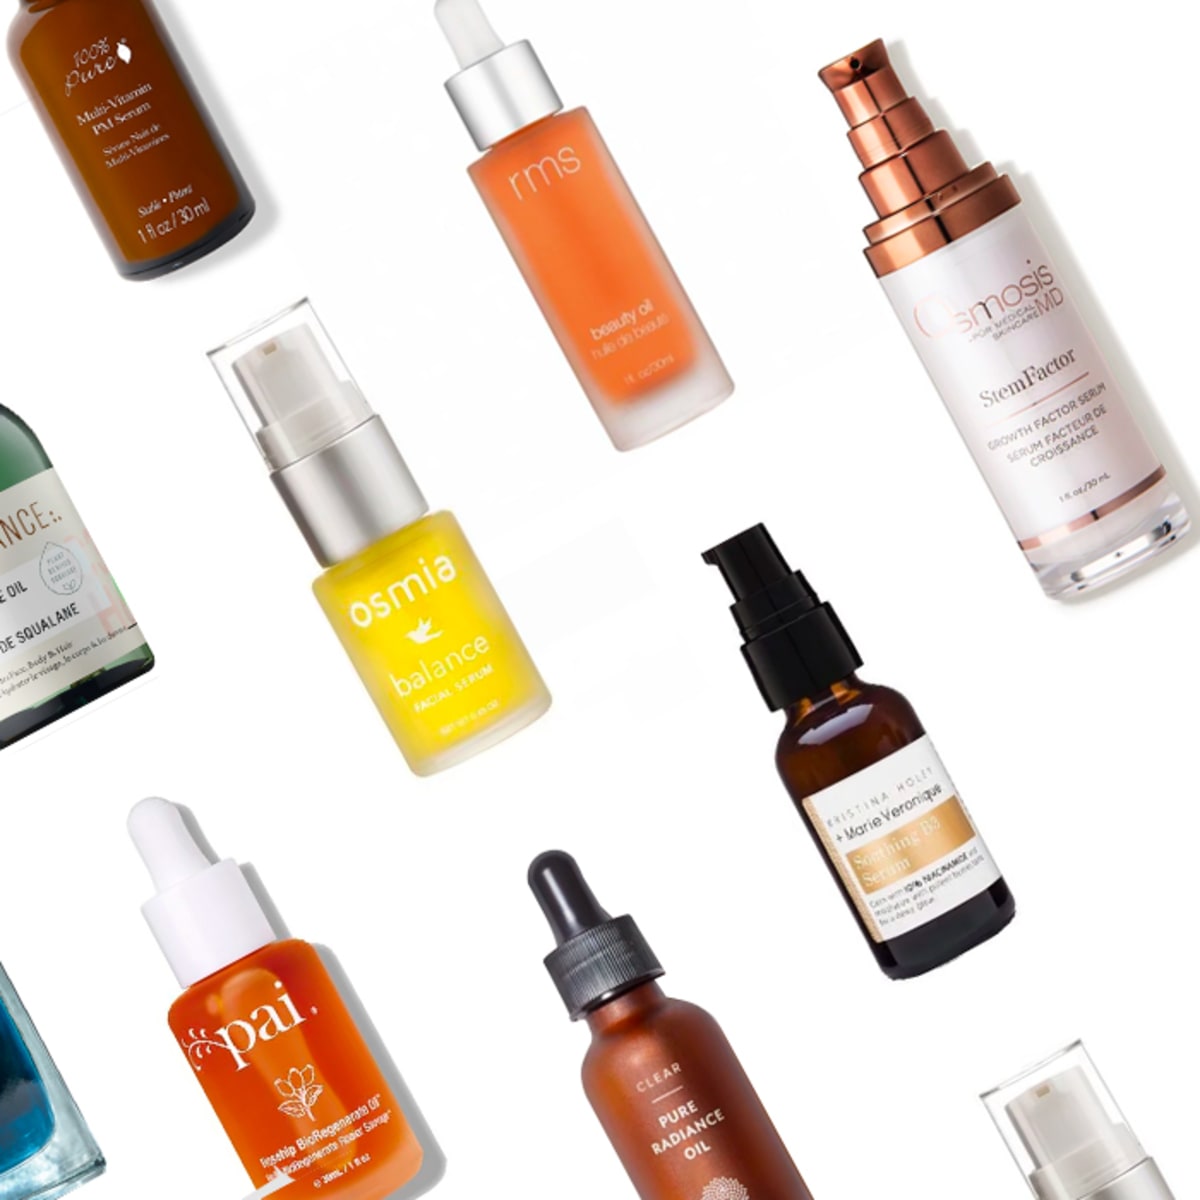 The 11 Very Best Natural Face Serums by Word-of-Mouth - Organic Authority